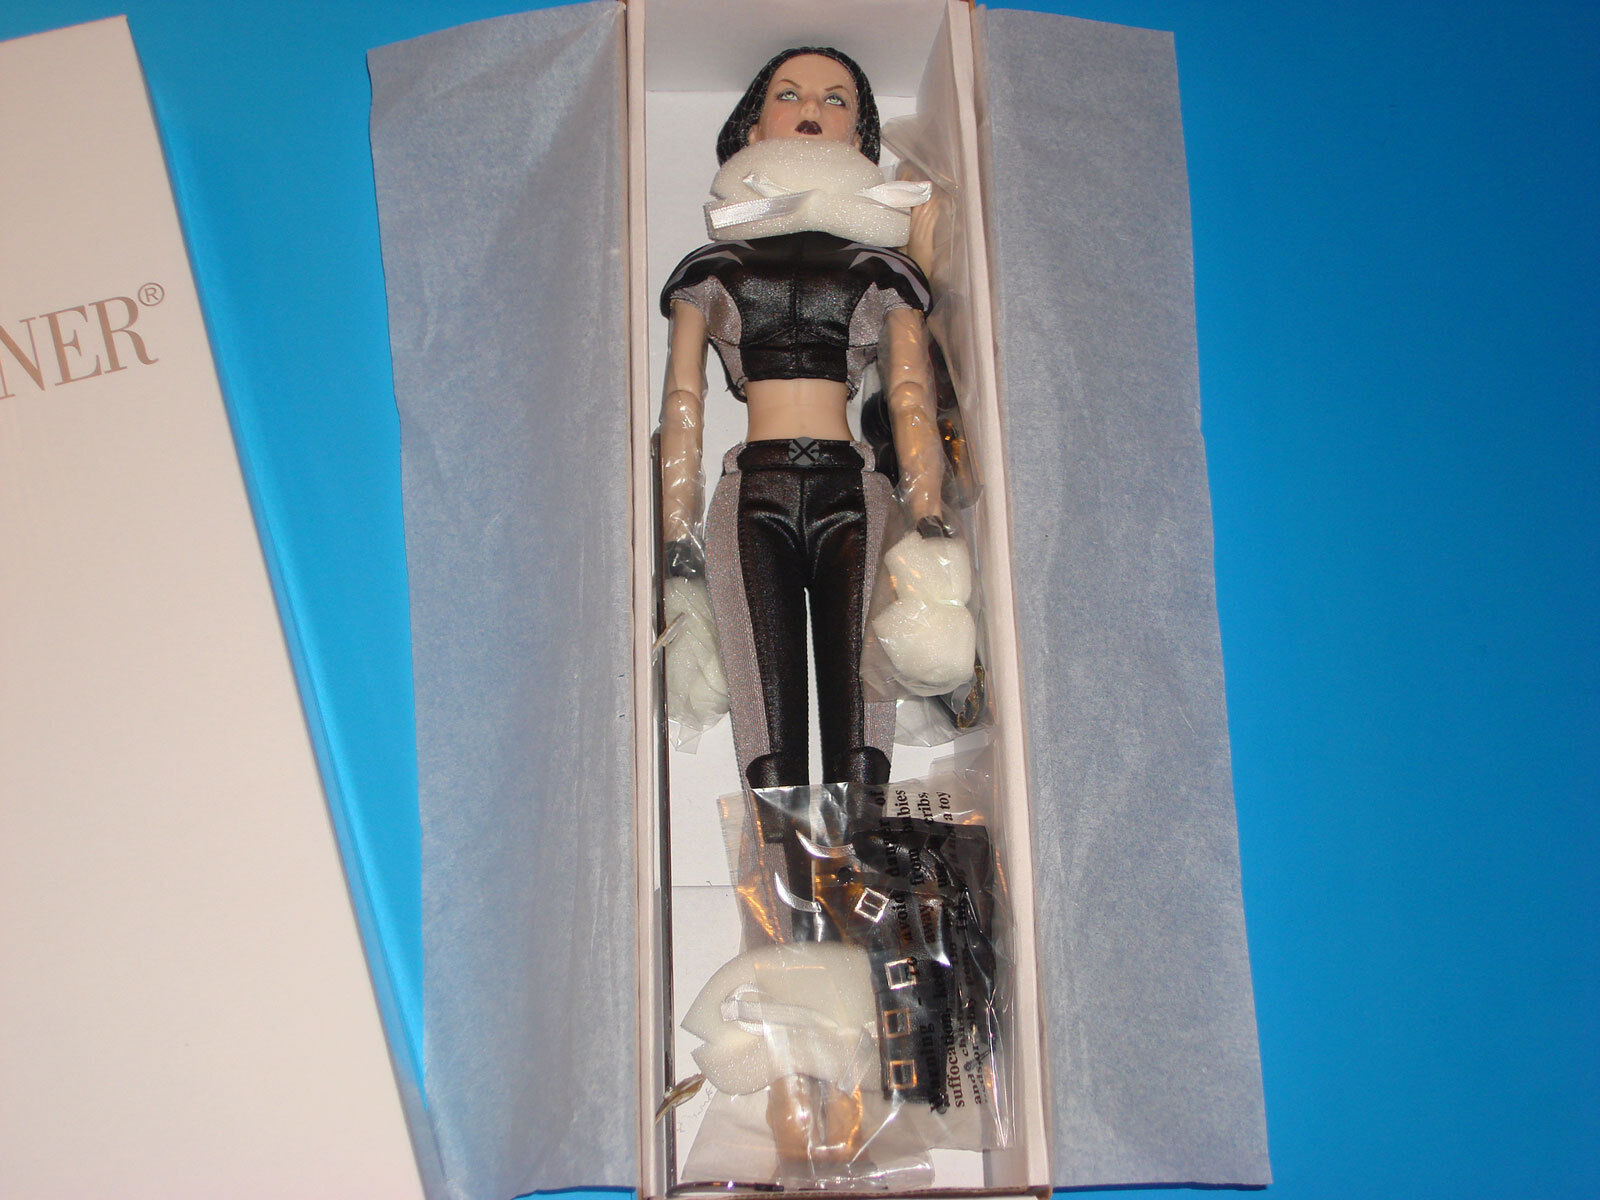 Marvel X-23 Tonnor Doll 16-inch Figure Collectors Edition X-Men Laura Kinney New